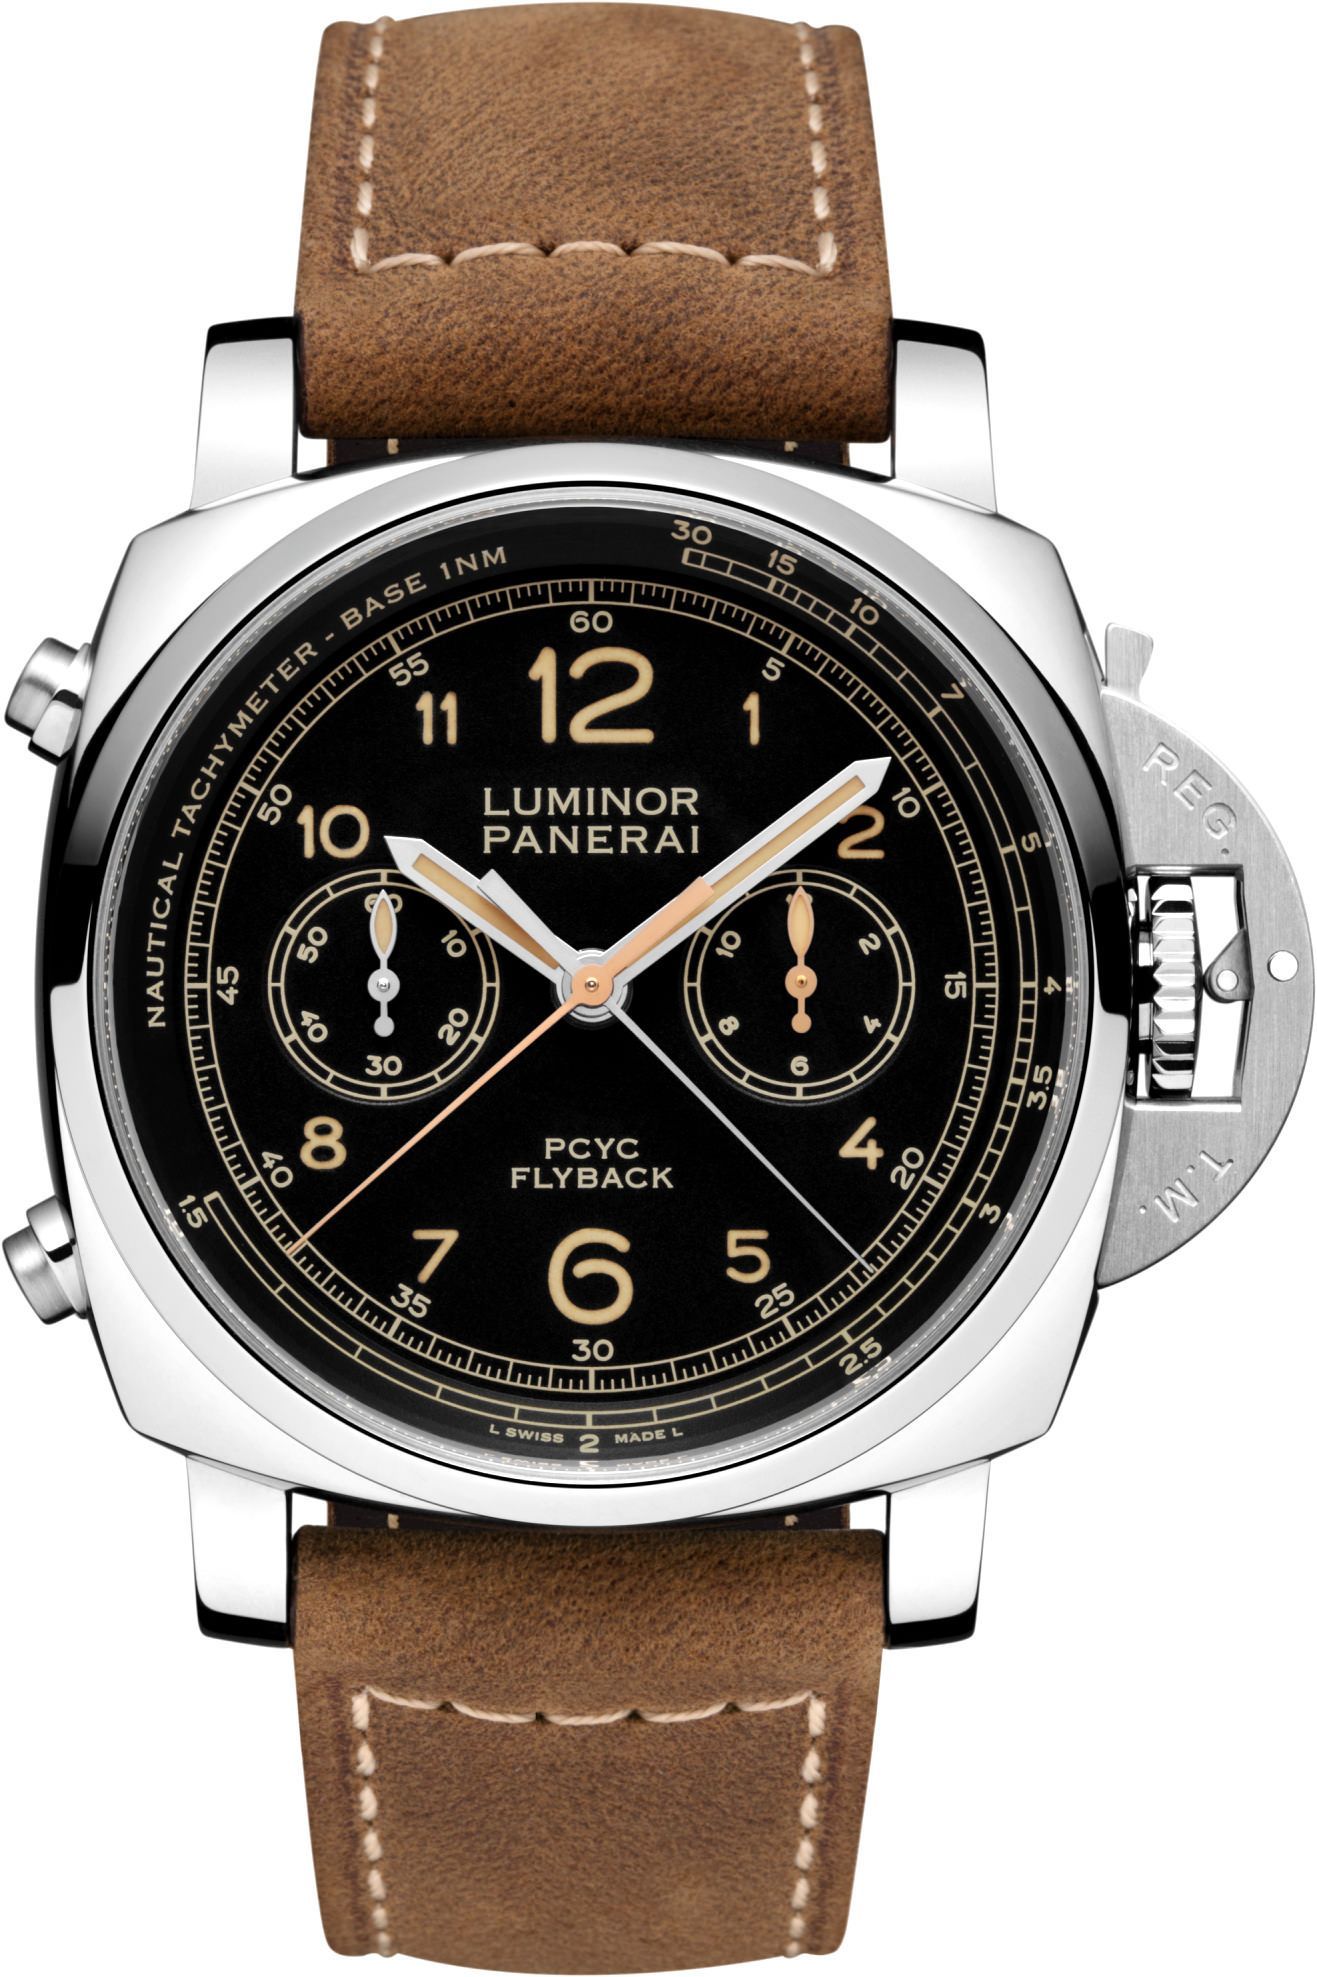 Panerai Luminor Pcyc 3 Days Chrono Flyback Automatic Black Dial 44 mm Automatic Watch For Men - 1